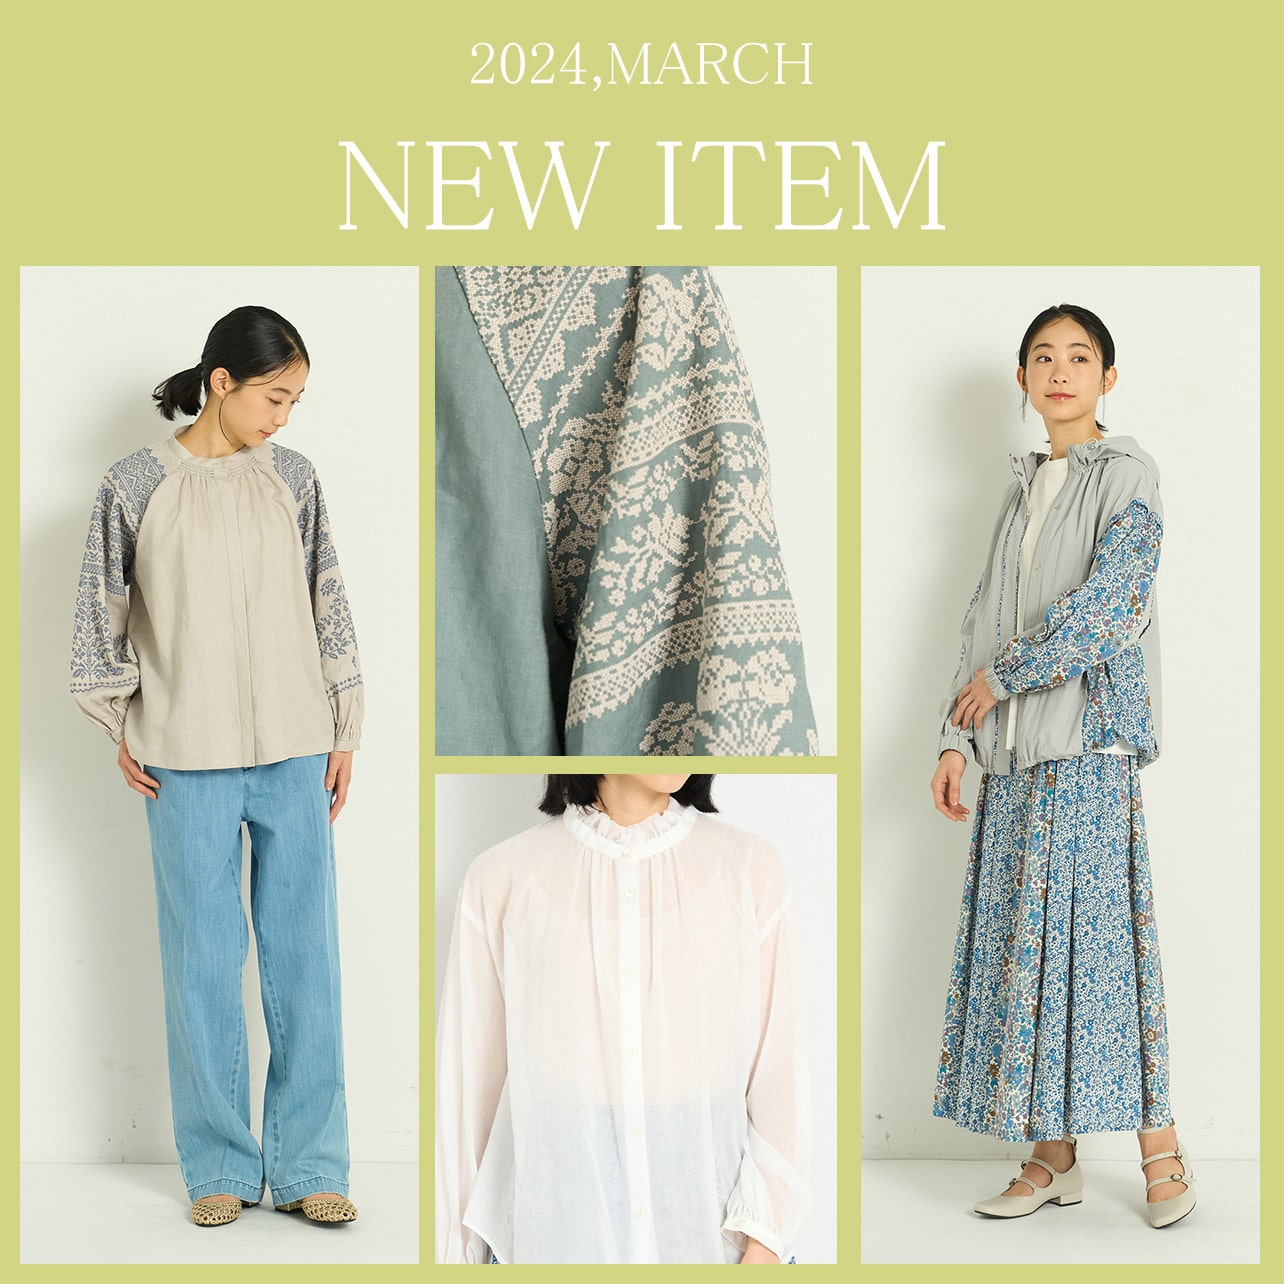 NEW ITEM MARCH